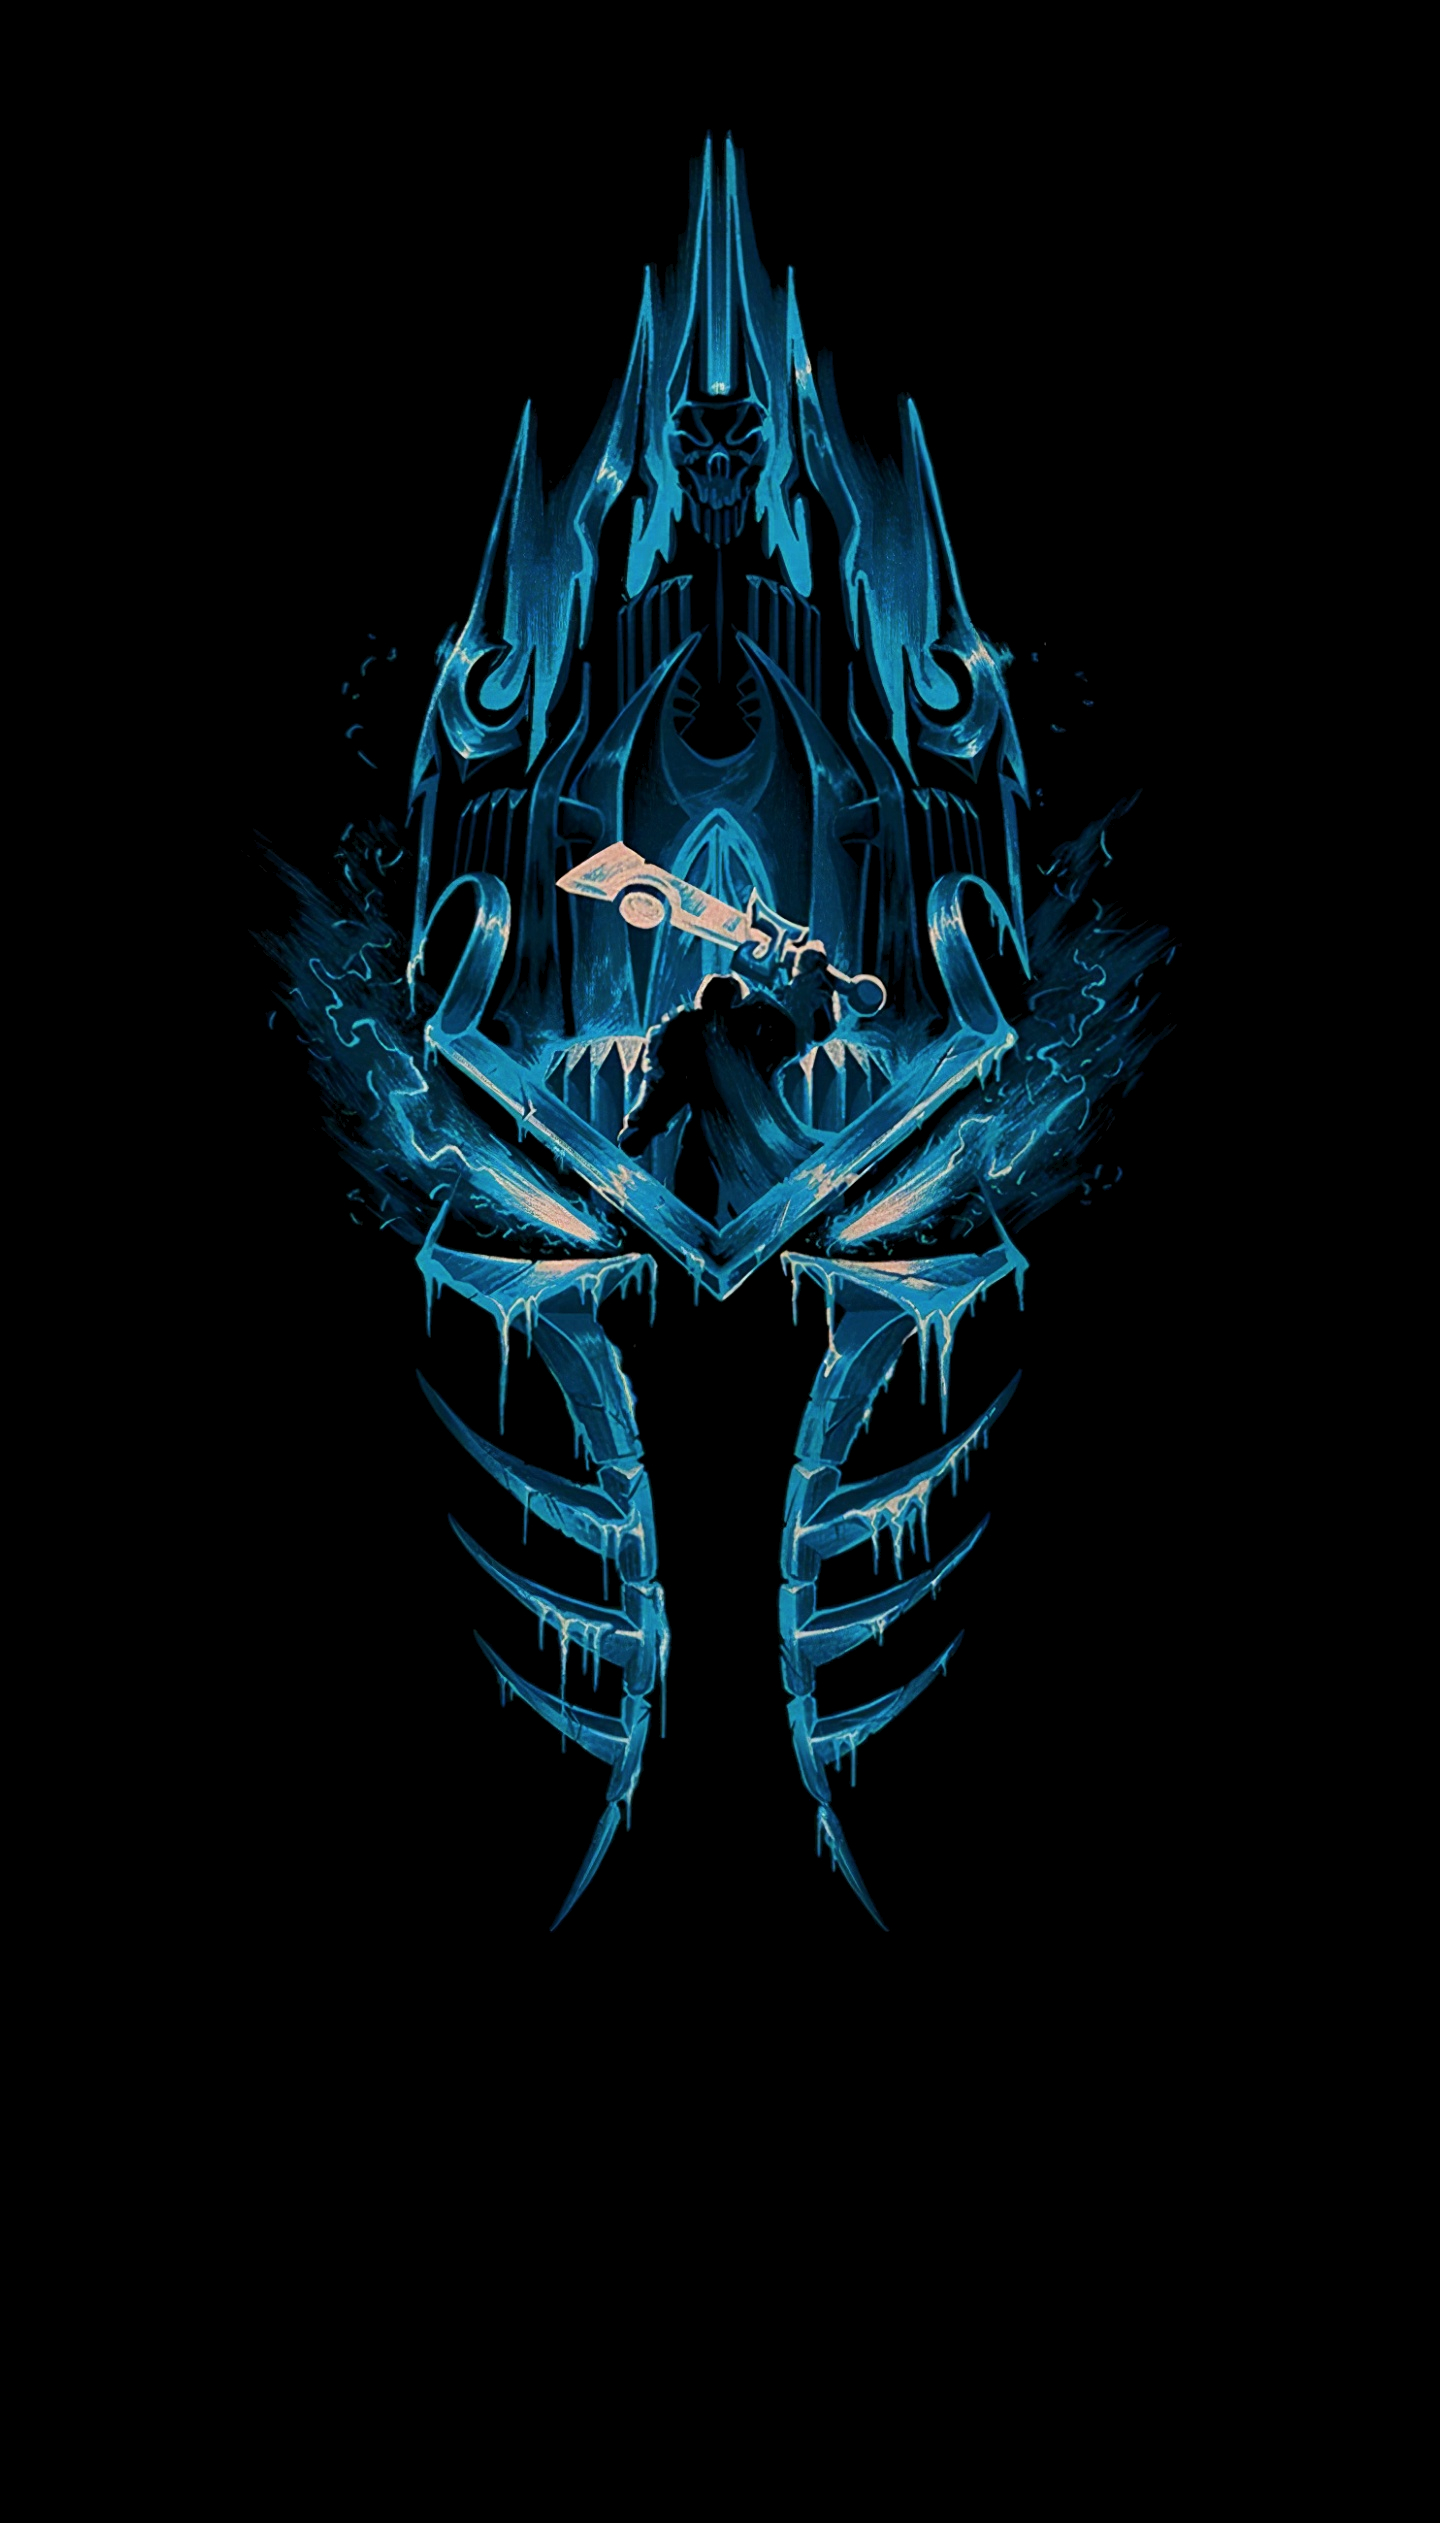 1440x2523 For the Warcraft fans out there &acirc;&#128;&#156;Wrath of the Lich King&acirc;&#128;&#157; &acirc;&#128;&#147; Wallpaper Dump